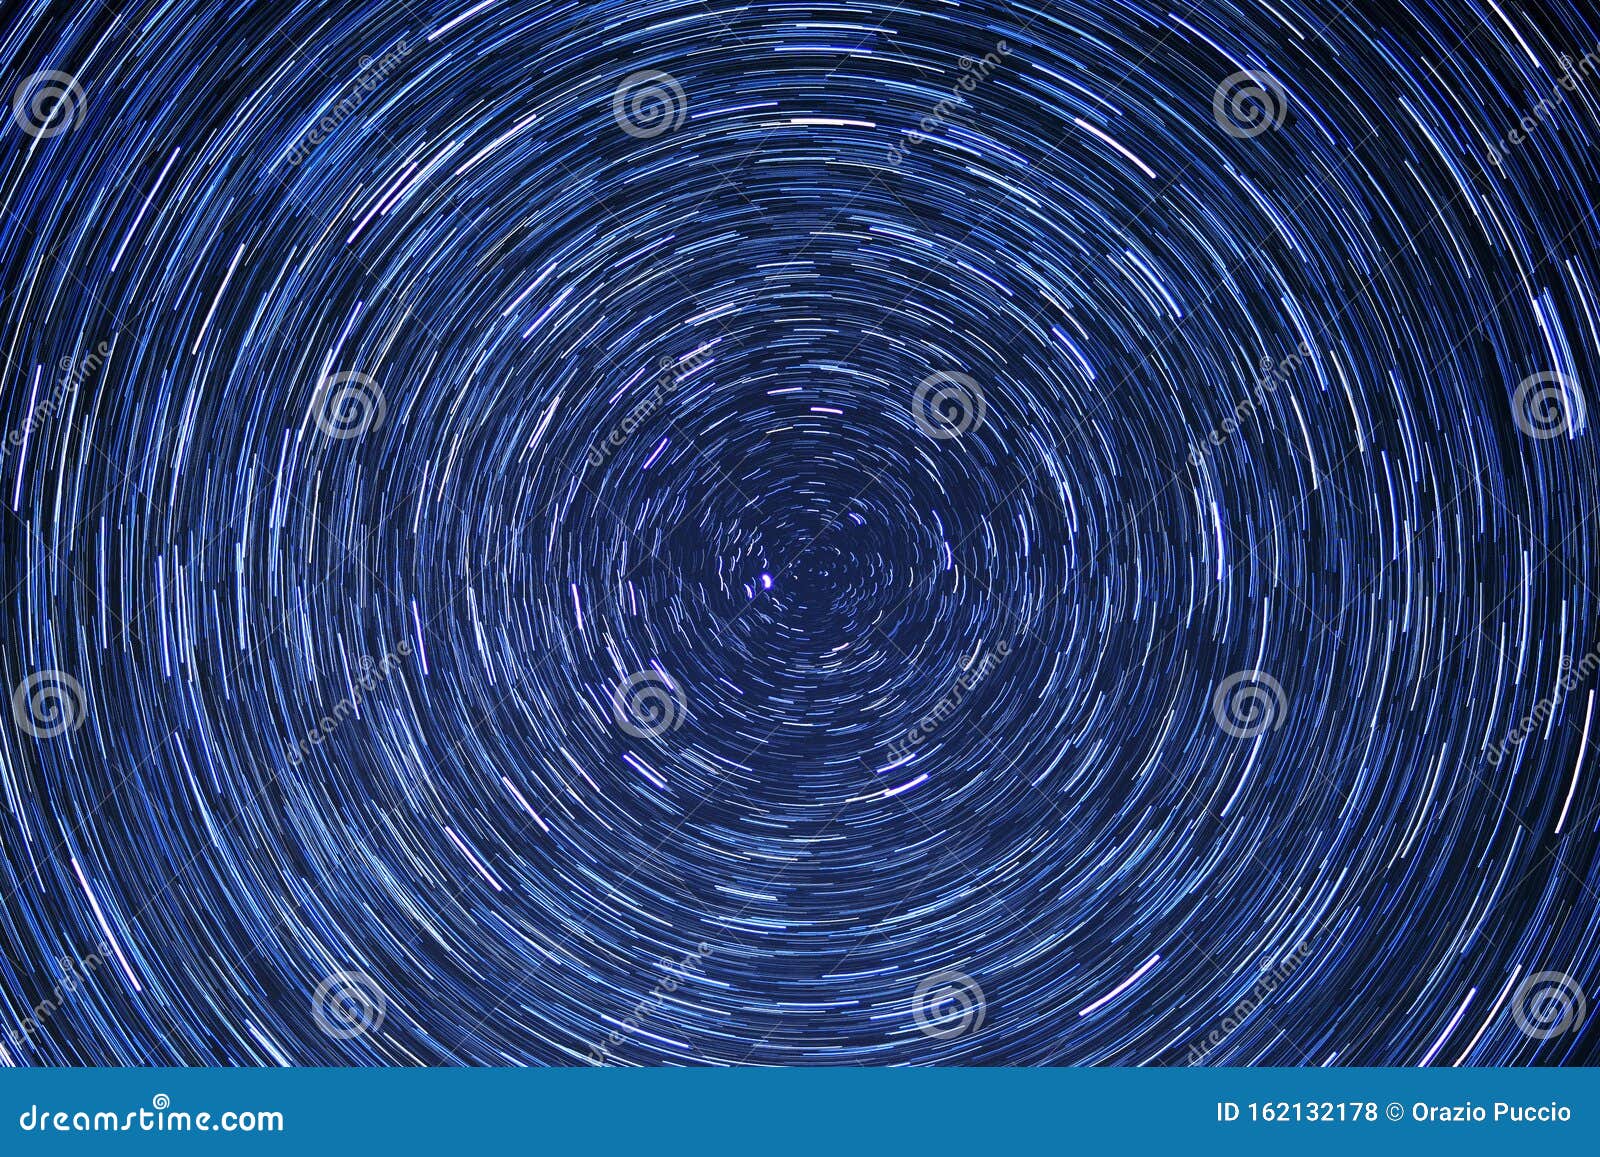 star trails _ vision of the stars that rotate in the firmament